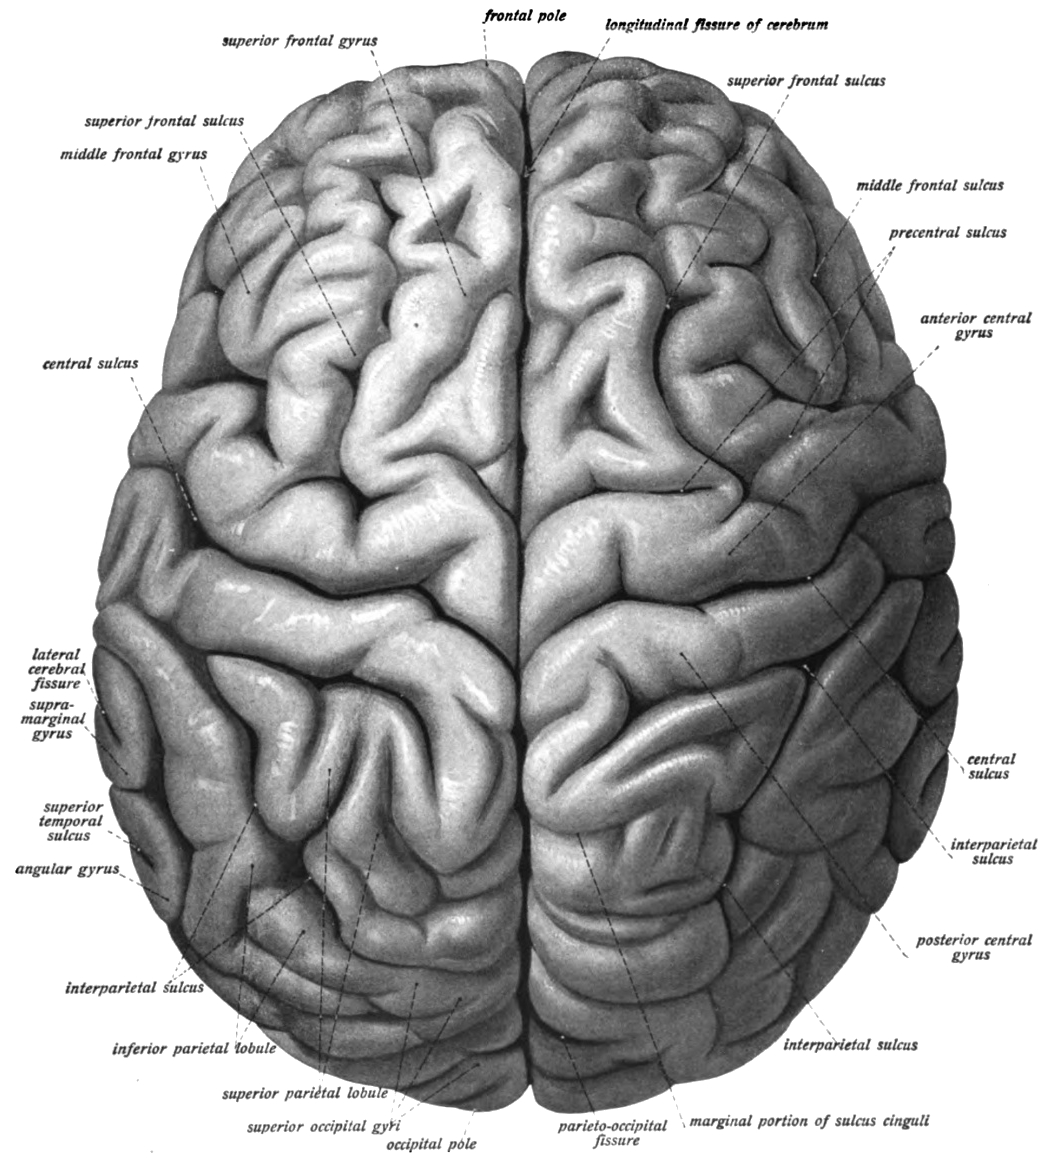 View of the human brain (cerebrum) showing the left and right hemispheres from the top. Sobotta’s Textbook and Atlas of Human Anatomy 1909